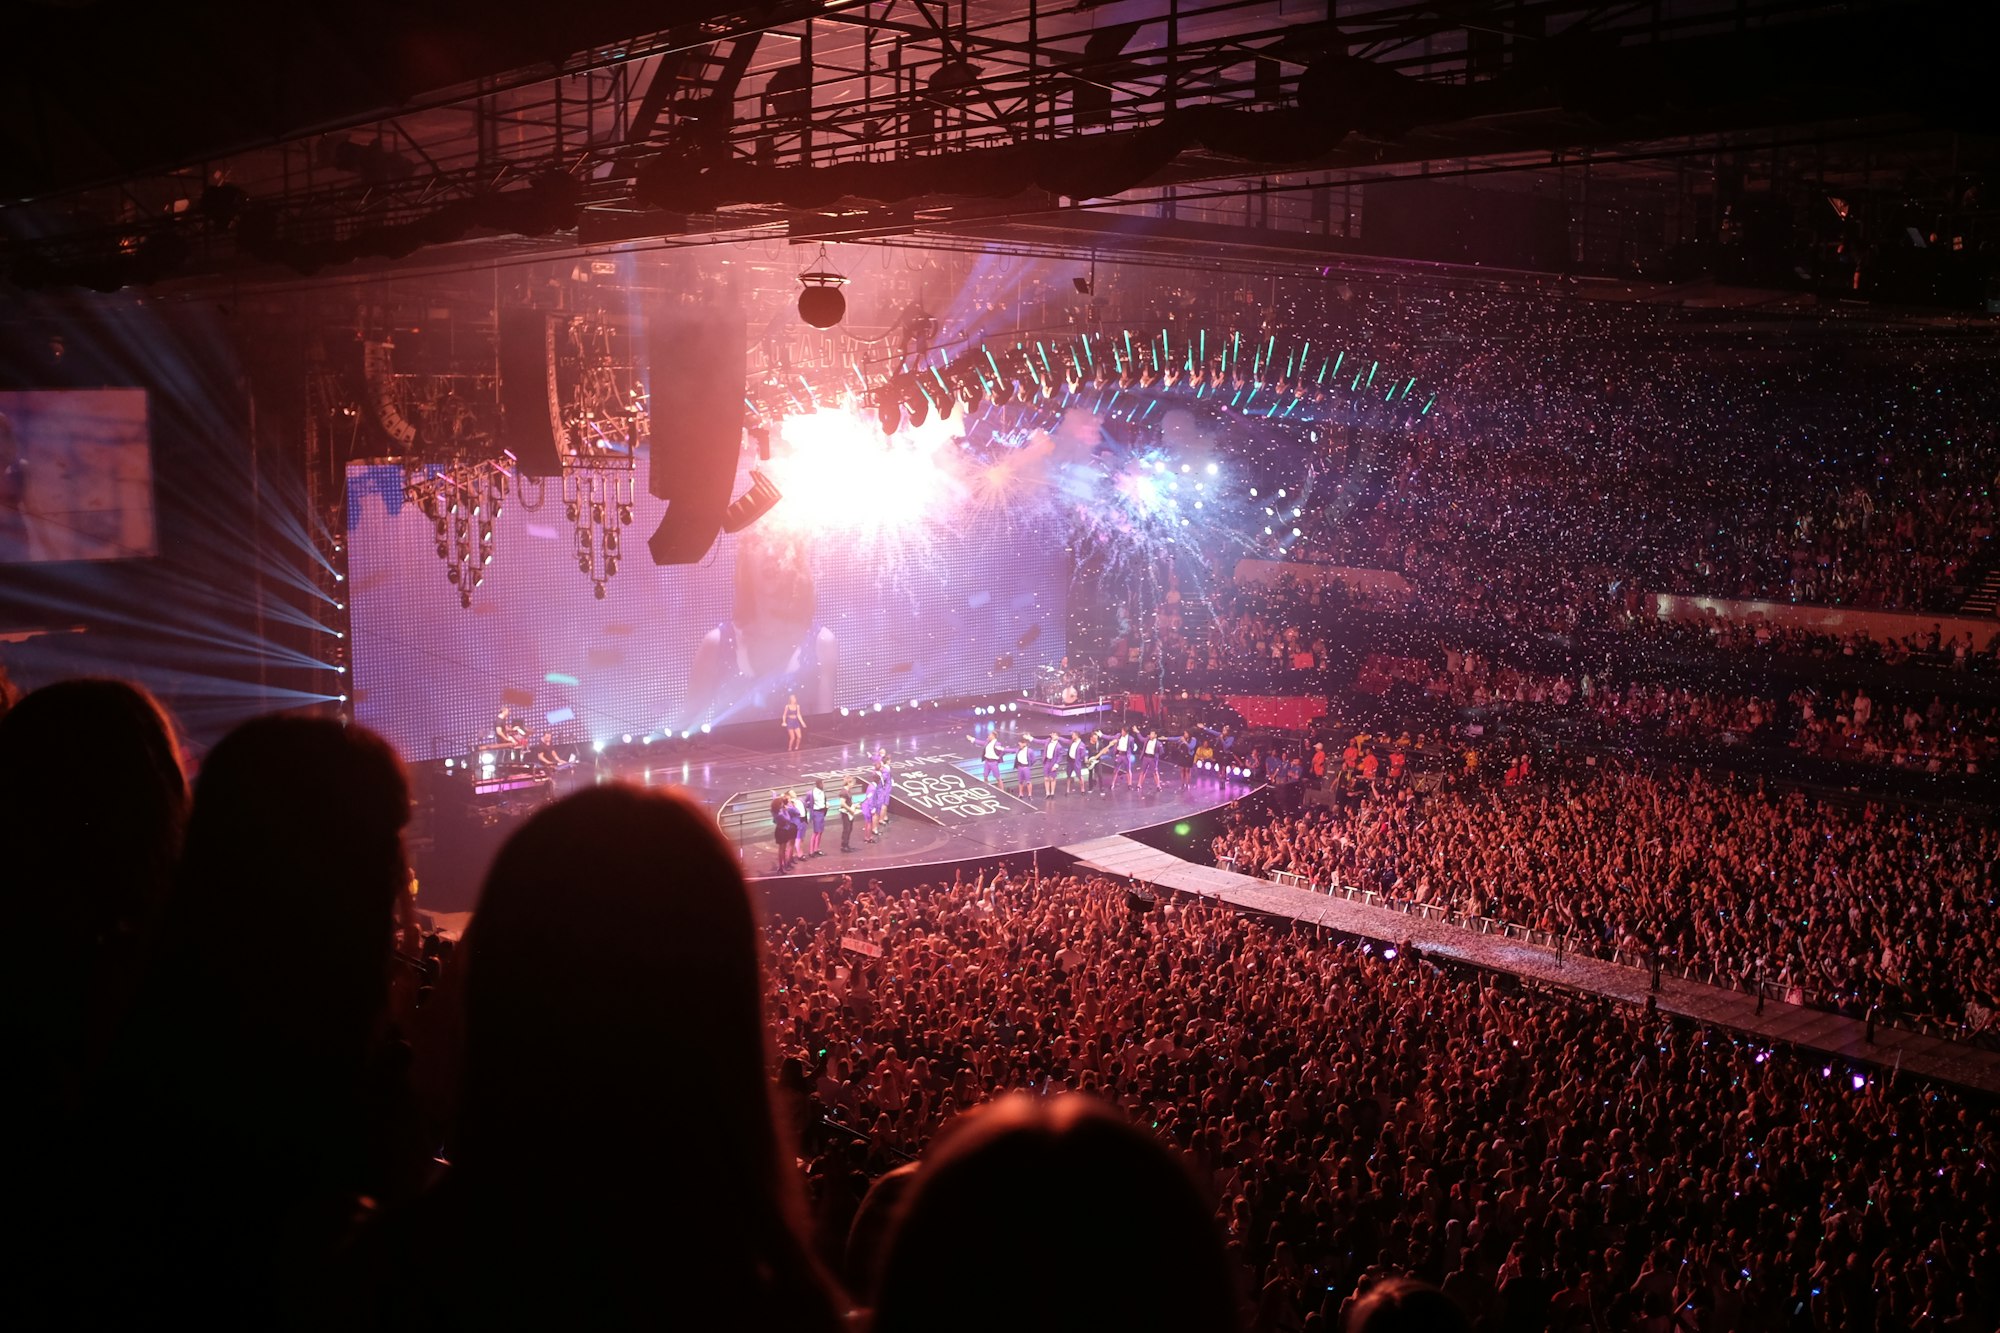 Full venue during a performance